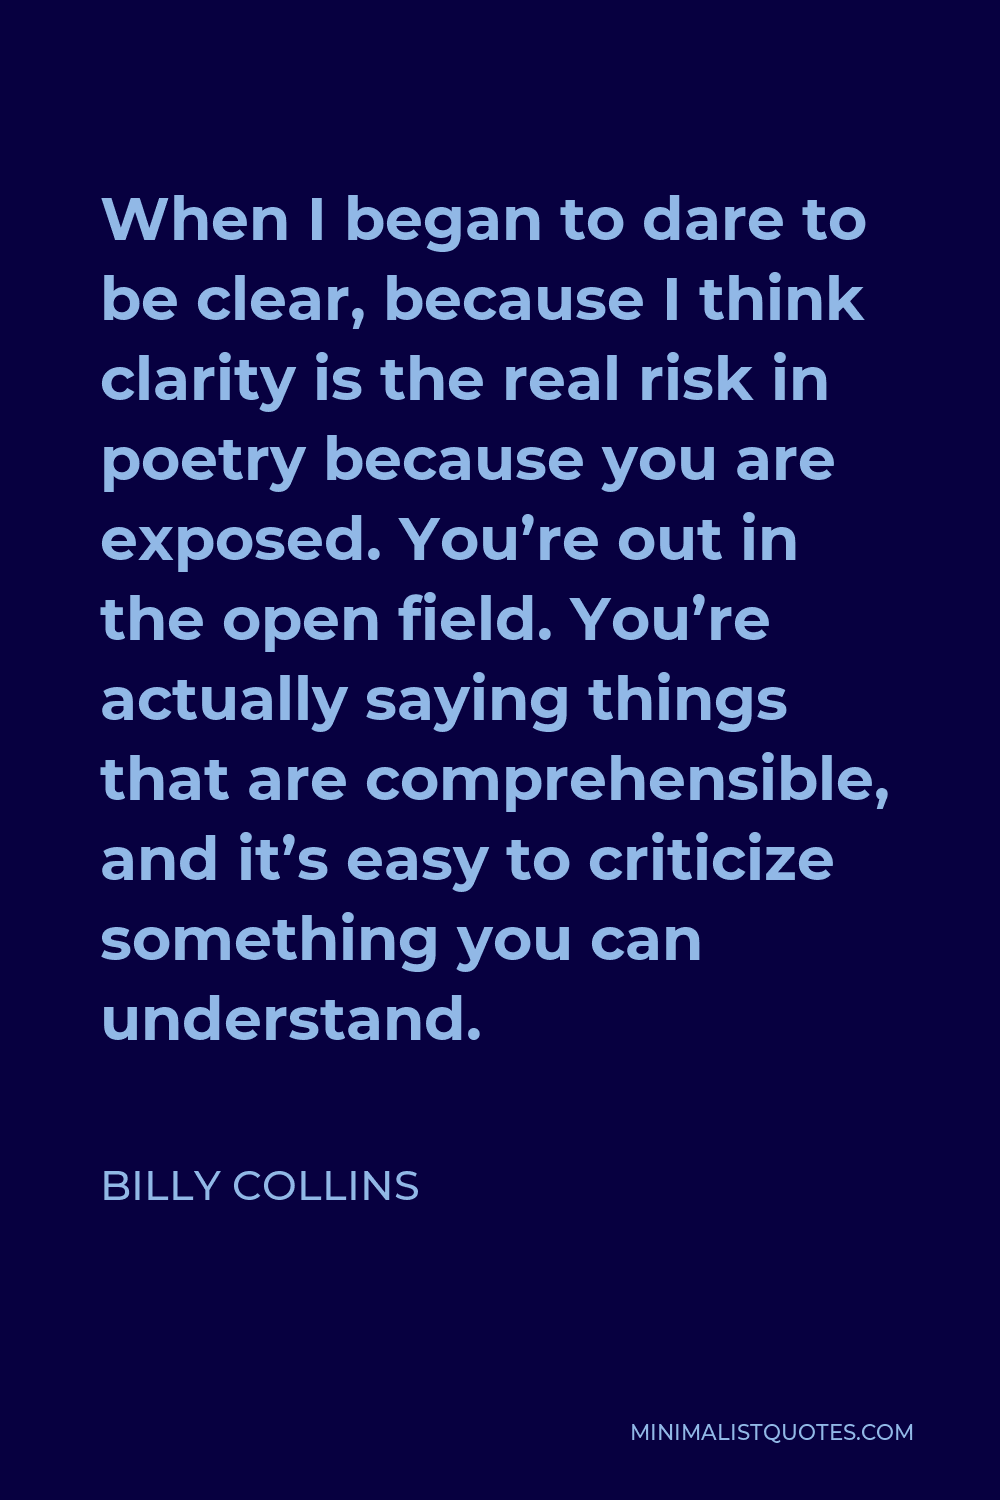 Billy Collins Quote - When I began to dare to be clear, because I think clarity is the real risk in poetry because you are exposed. You’re out in the open field. You’re actually saying things that are comprehensible, and it’s easy to criticize something you can understand.